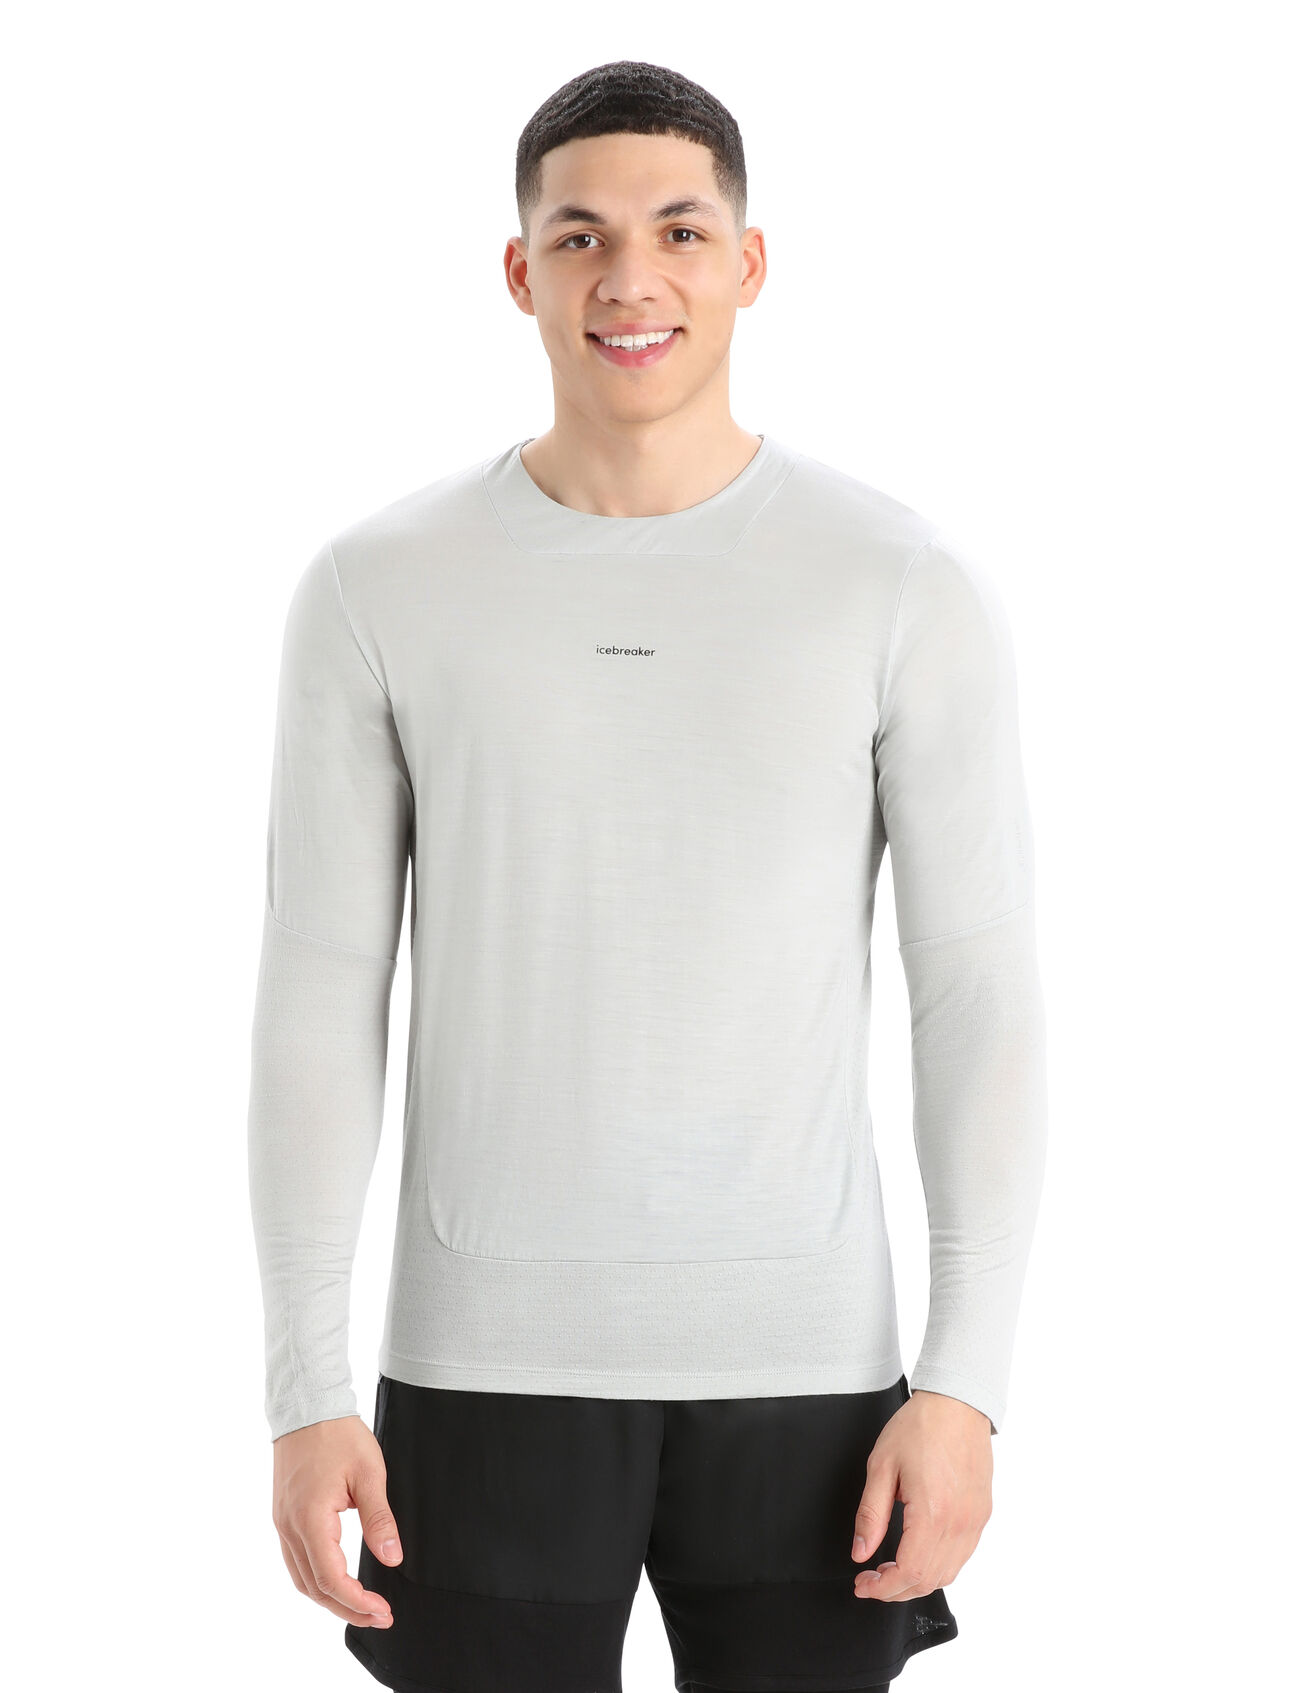 Mens ZoneKnit™ Merino Long Sleeve T-Shirt Our most breathable and lightweight tee designed for running, biking and other high exertion pursuits, the ZoneKnit™ Long Sleeve Tee combines our Cool-Lite™ jersey fabric with strategic panels of eyelet mesh for enhanced airflow.